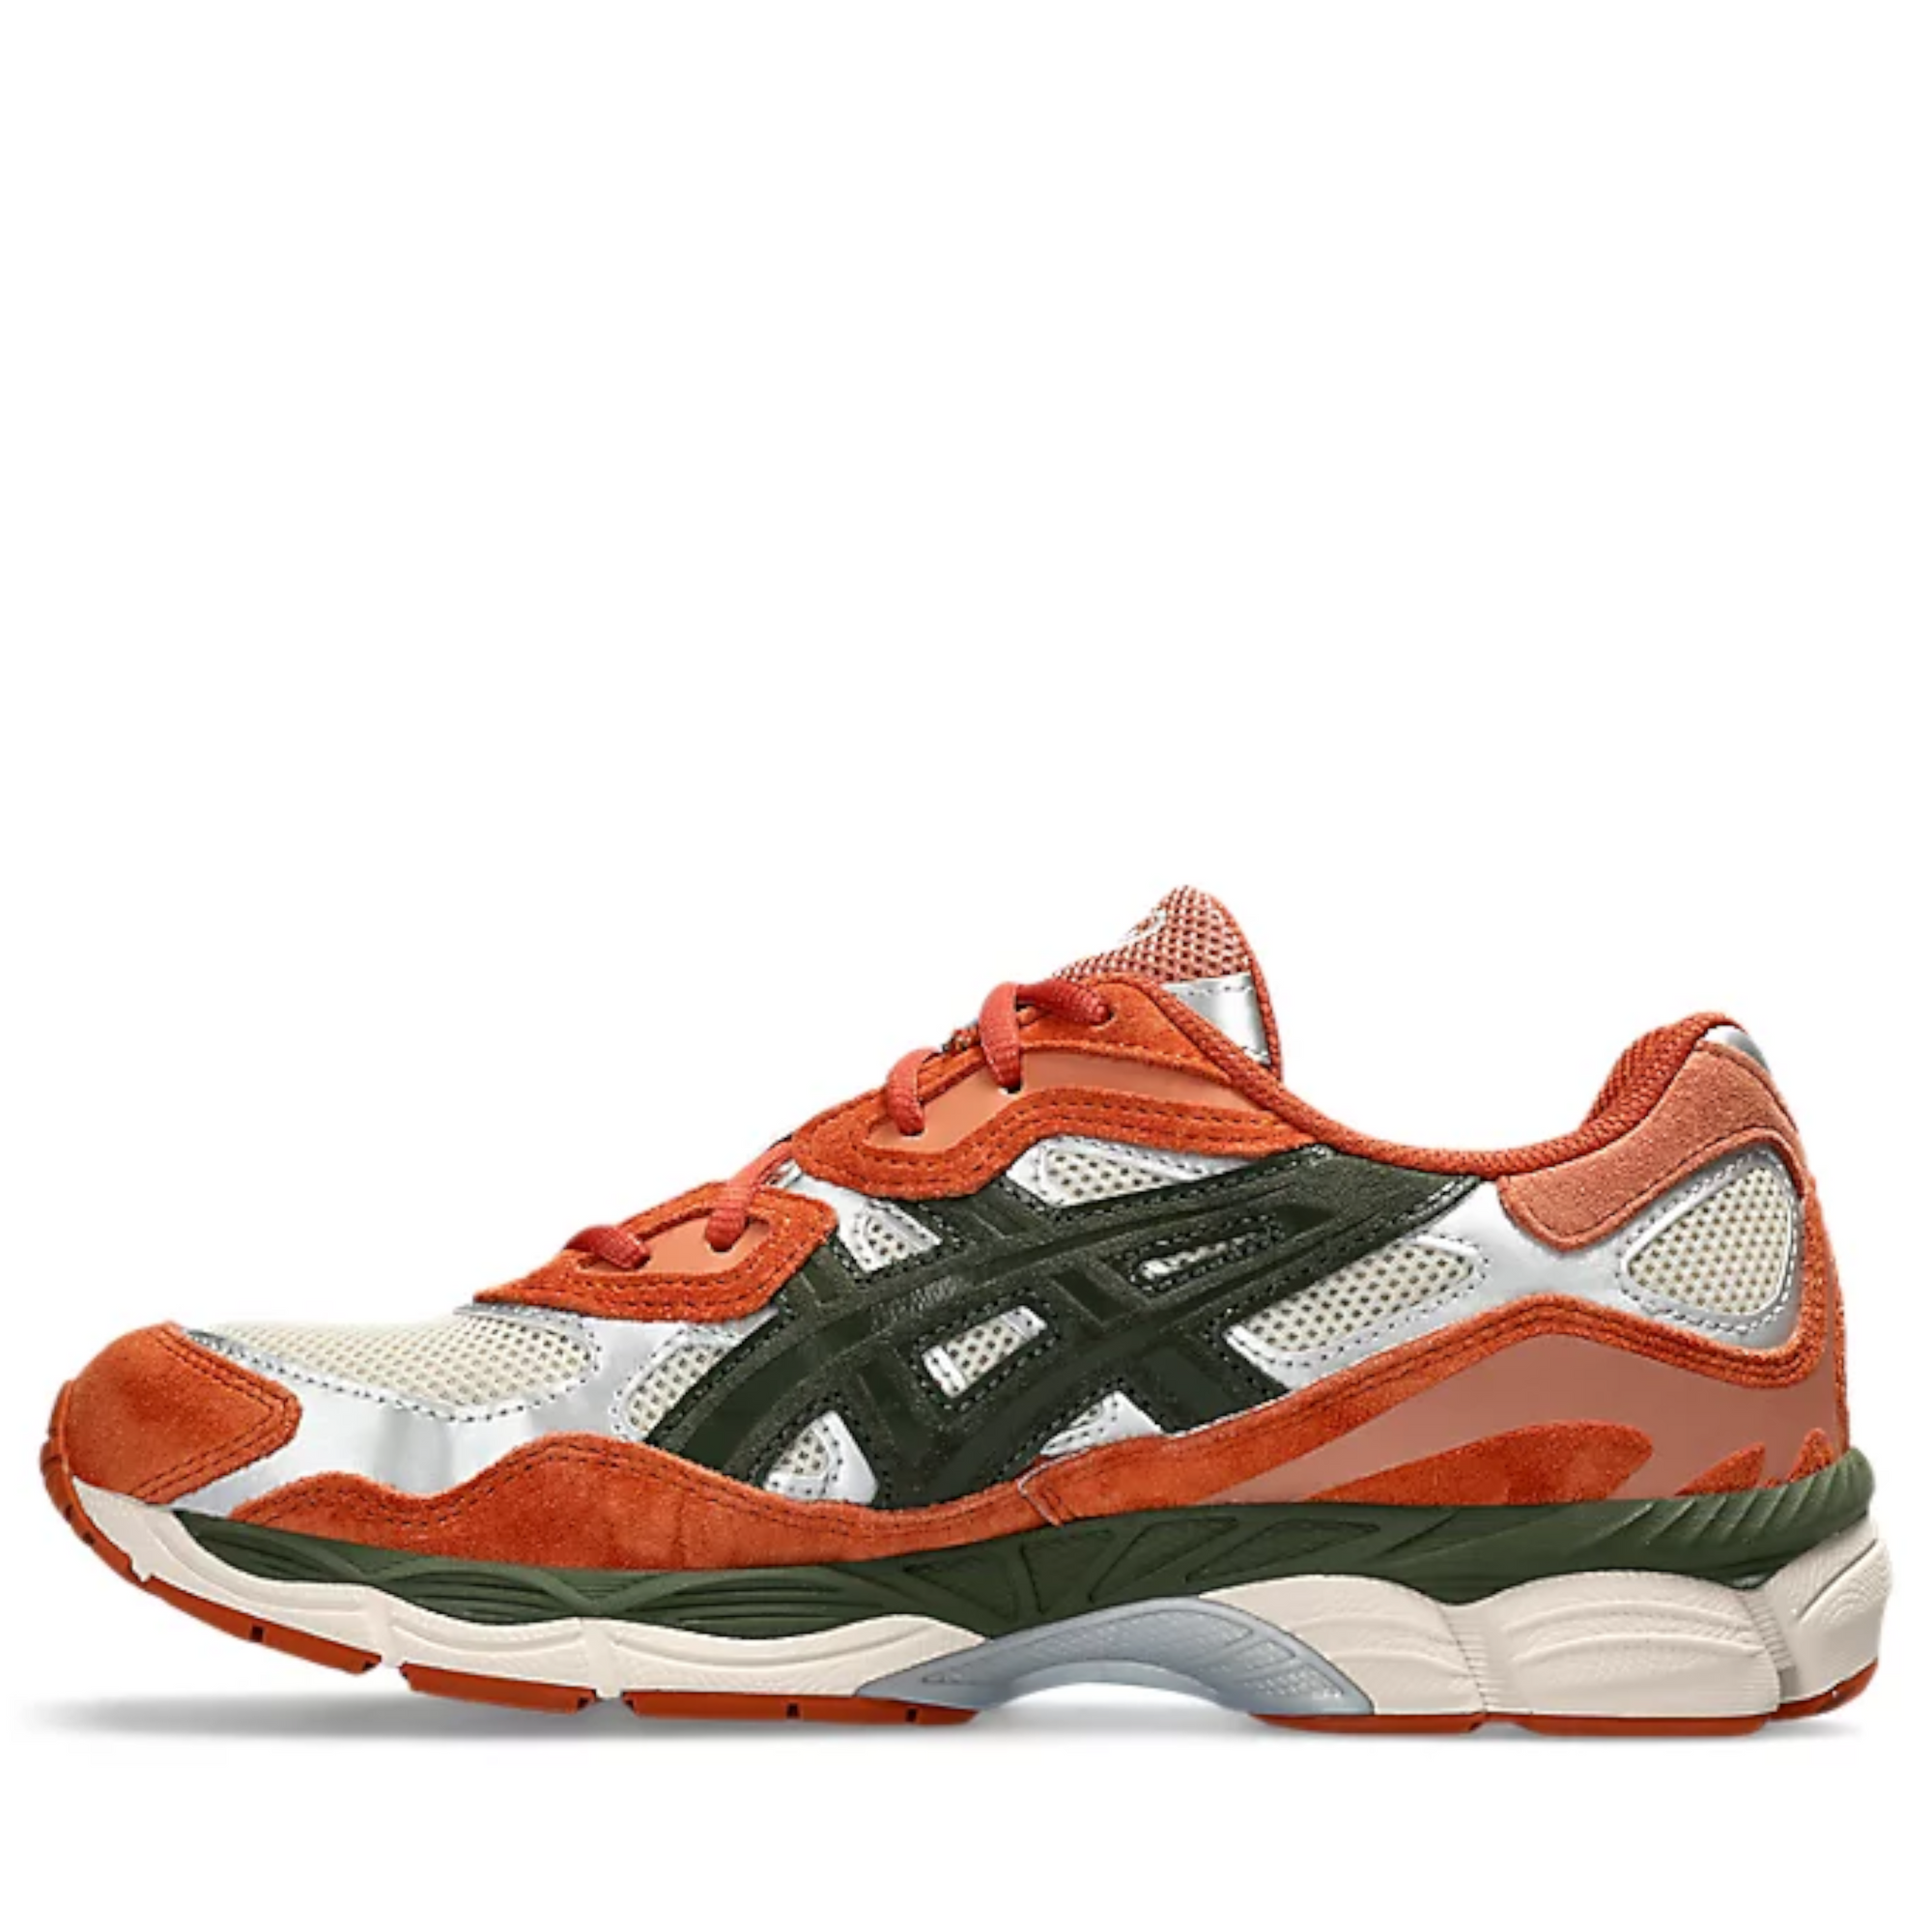 ASICS - Men's Gel-NYC - (Oatmeal/Forest 1201A789-251) view 2